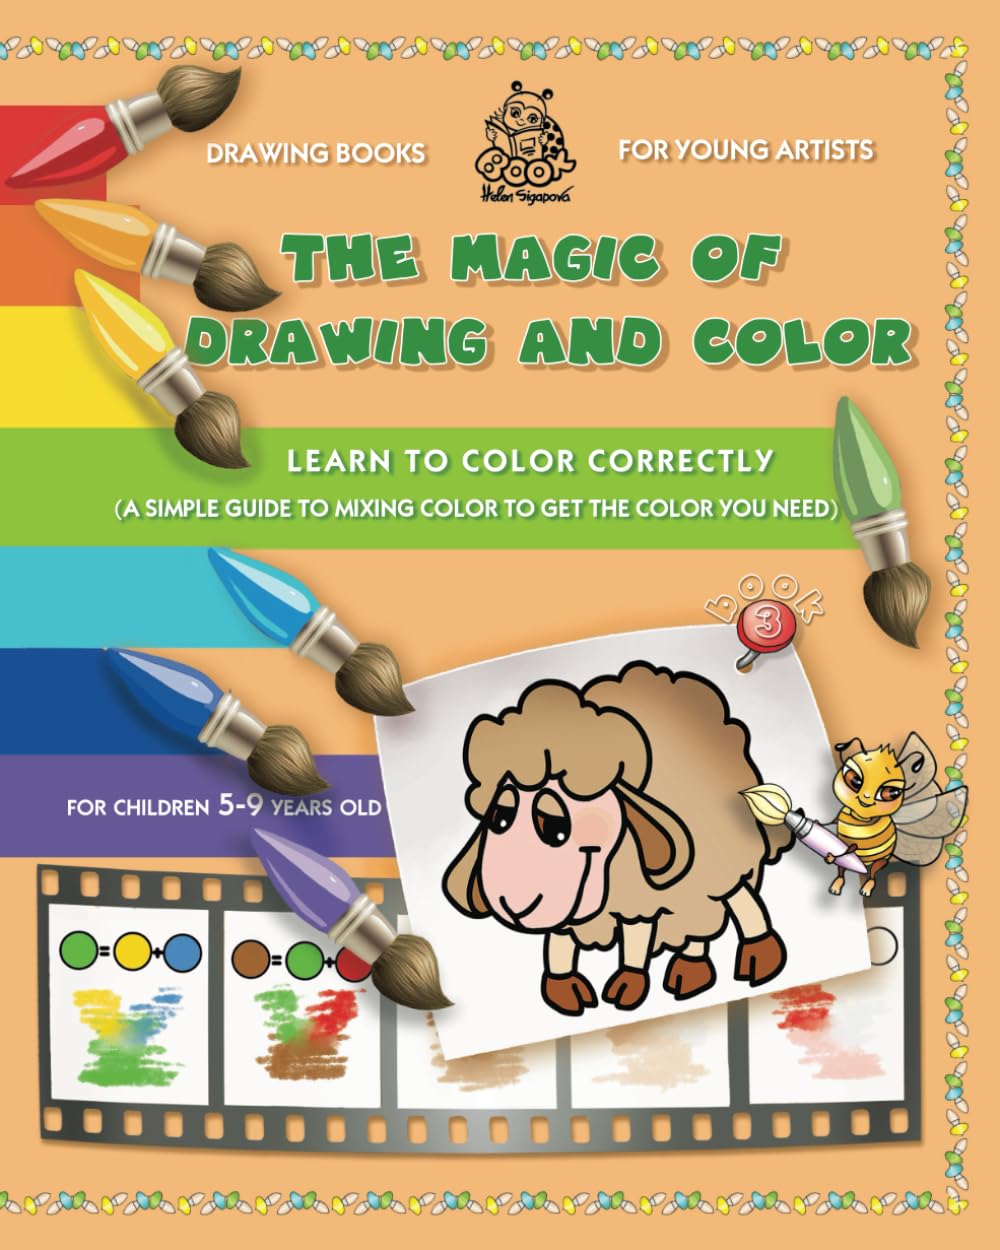 THE MAGIC OF DRAWING AND COLOR FOR YOUNG ARTISTS: LEARN TO COLOR CORRECTLY. (A SIMPLE GUIDE TO MIXING COLOR TO GET THE COLOR YOU NEED)